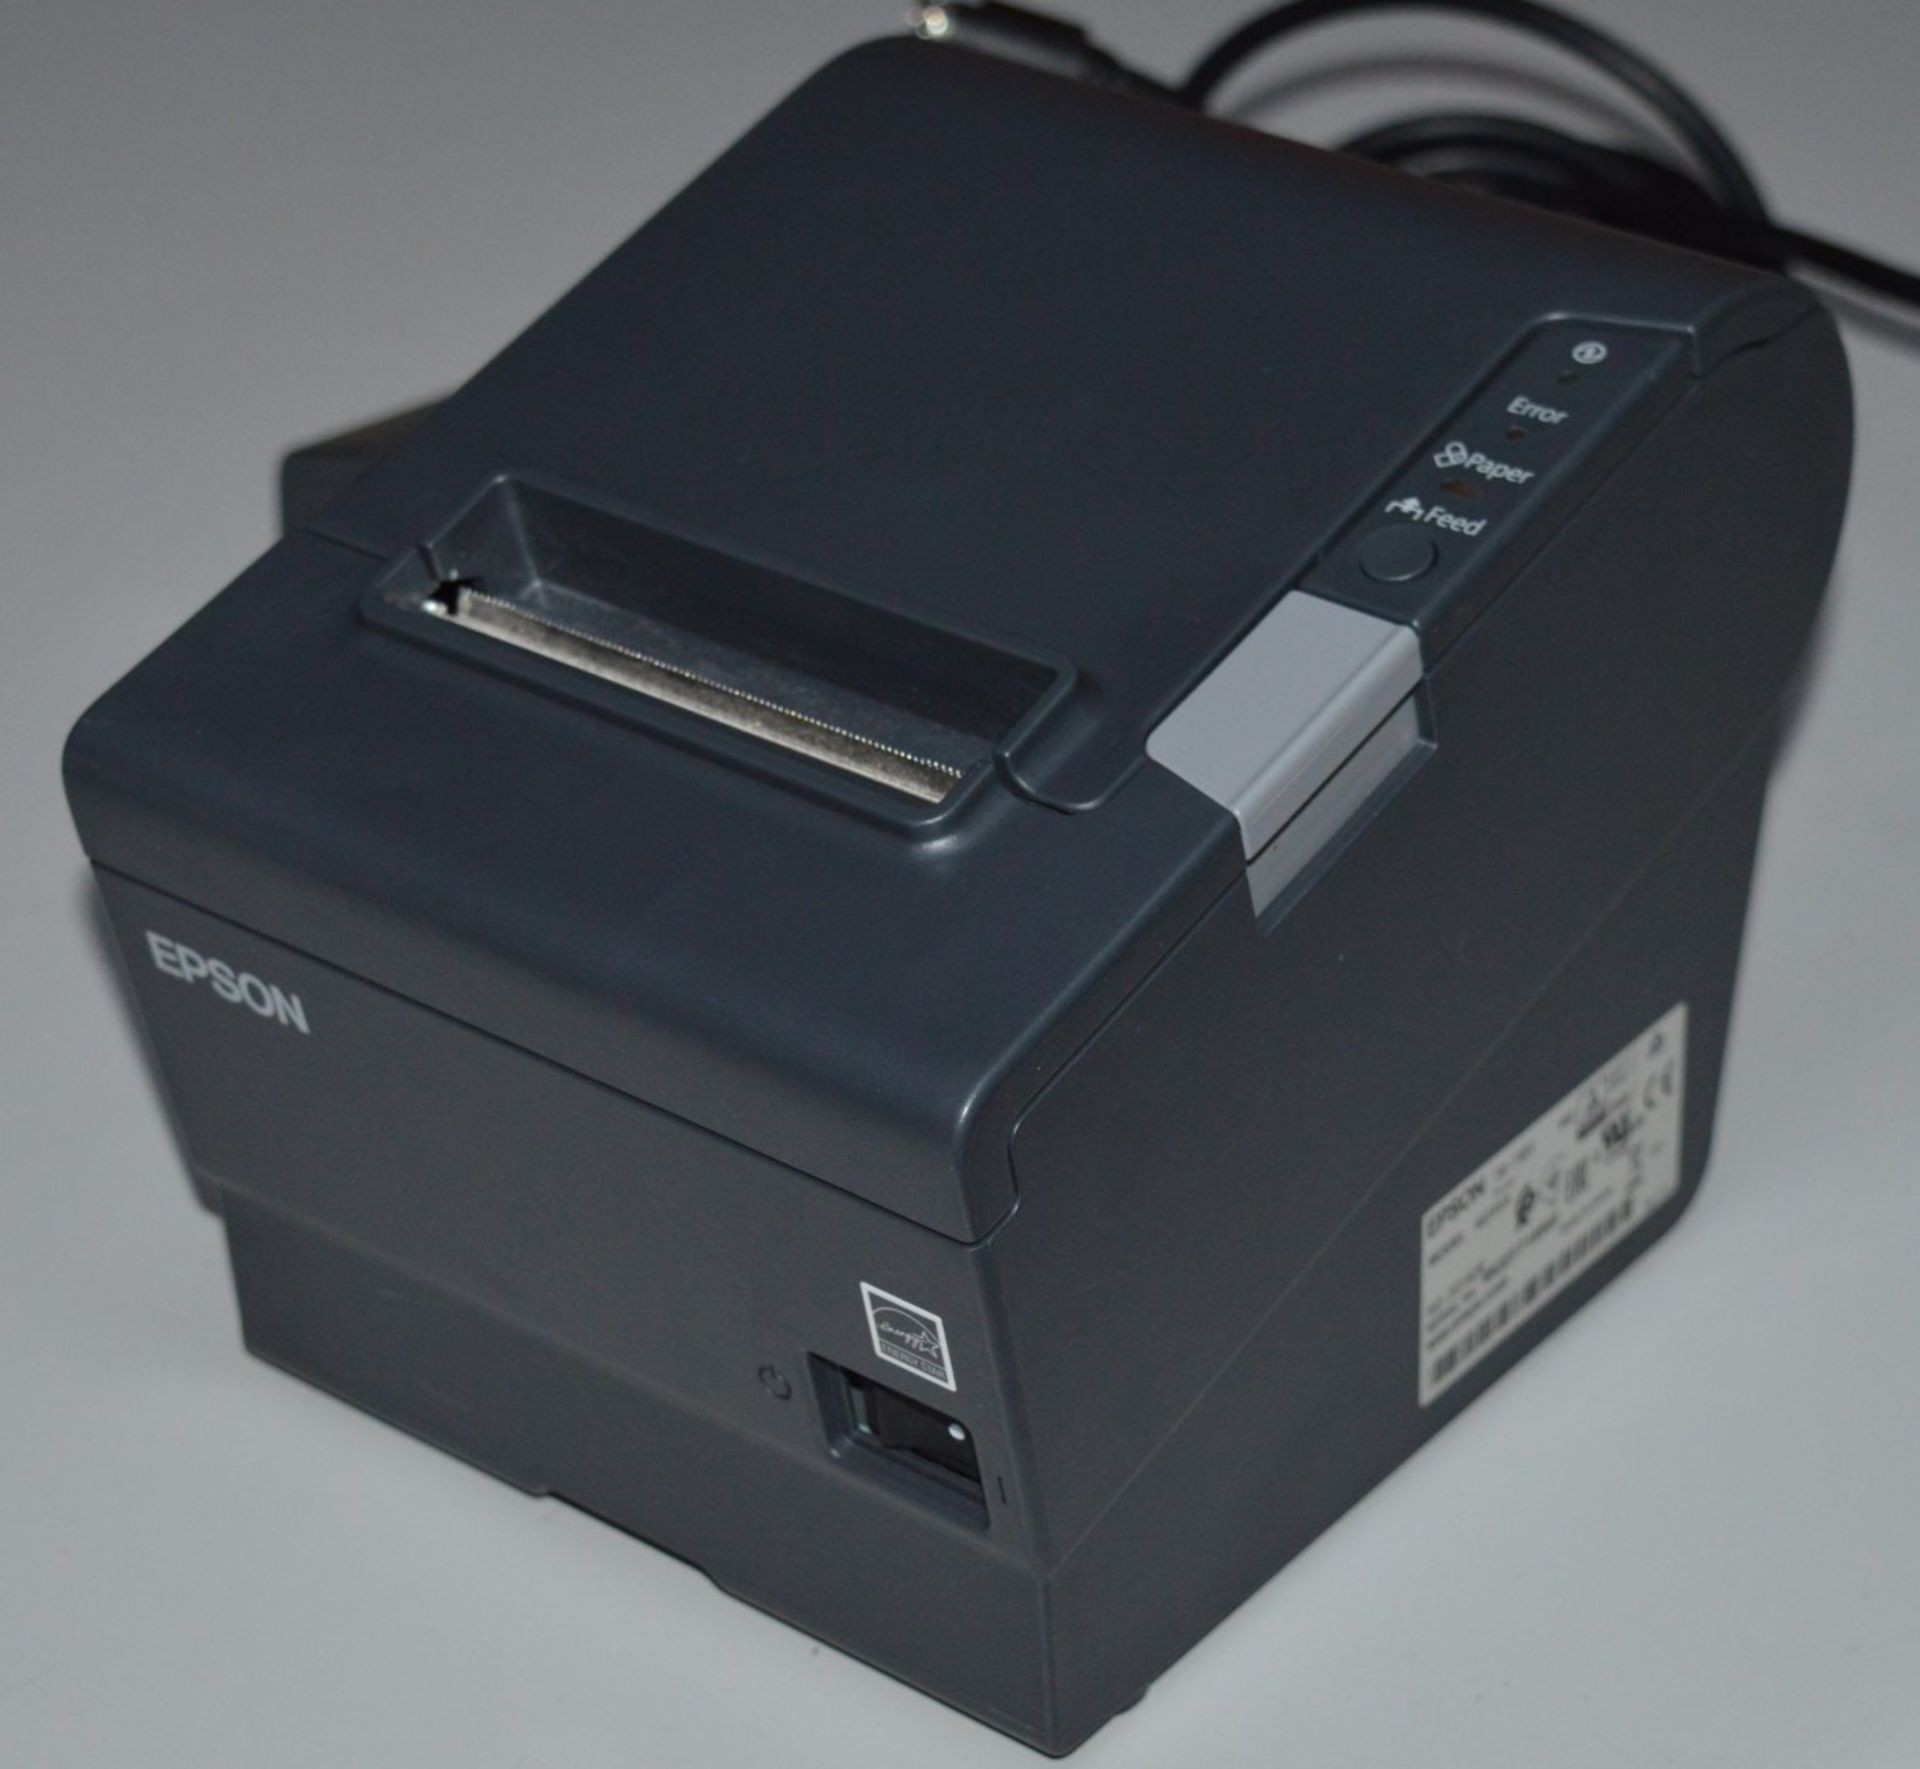 1 x Epson TM-T88V M244A Thermal Receipt Printer With USB - Includes Connection/Power Cable - CL285 - - Image 7 of 7